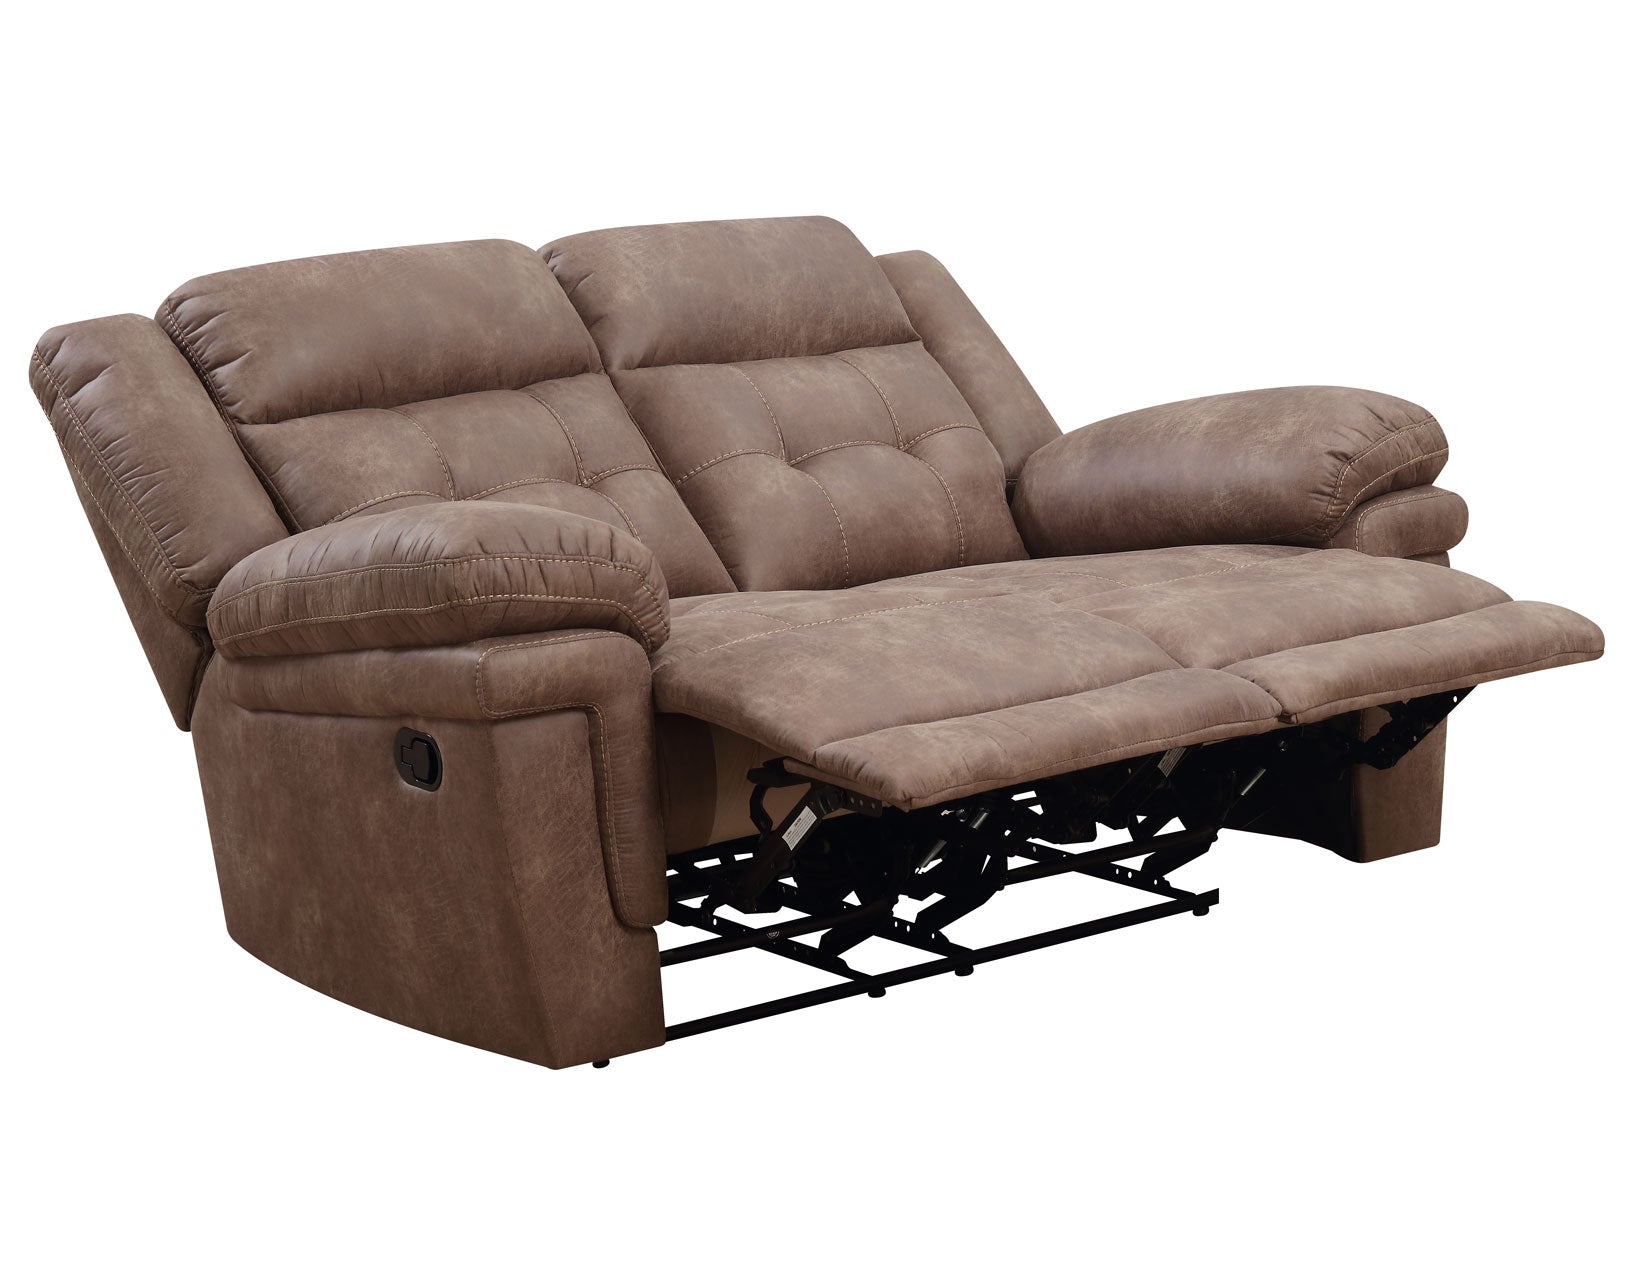 Anastasia Cocoa 3 Piece Manual Motion Set(Sofa, Loveseat & Chair) by Steve Silver